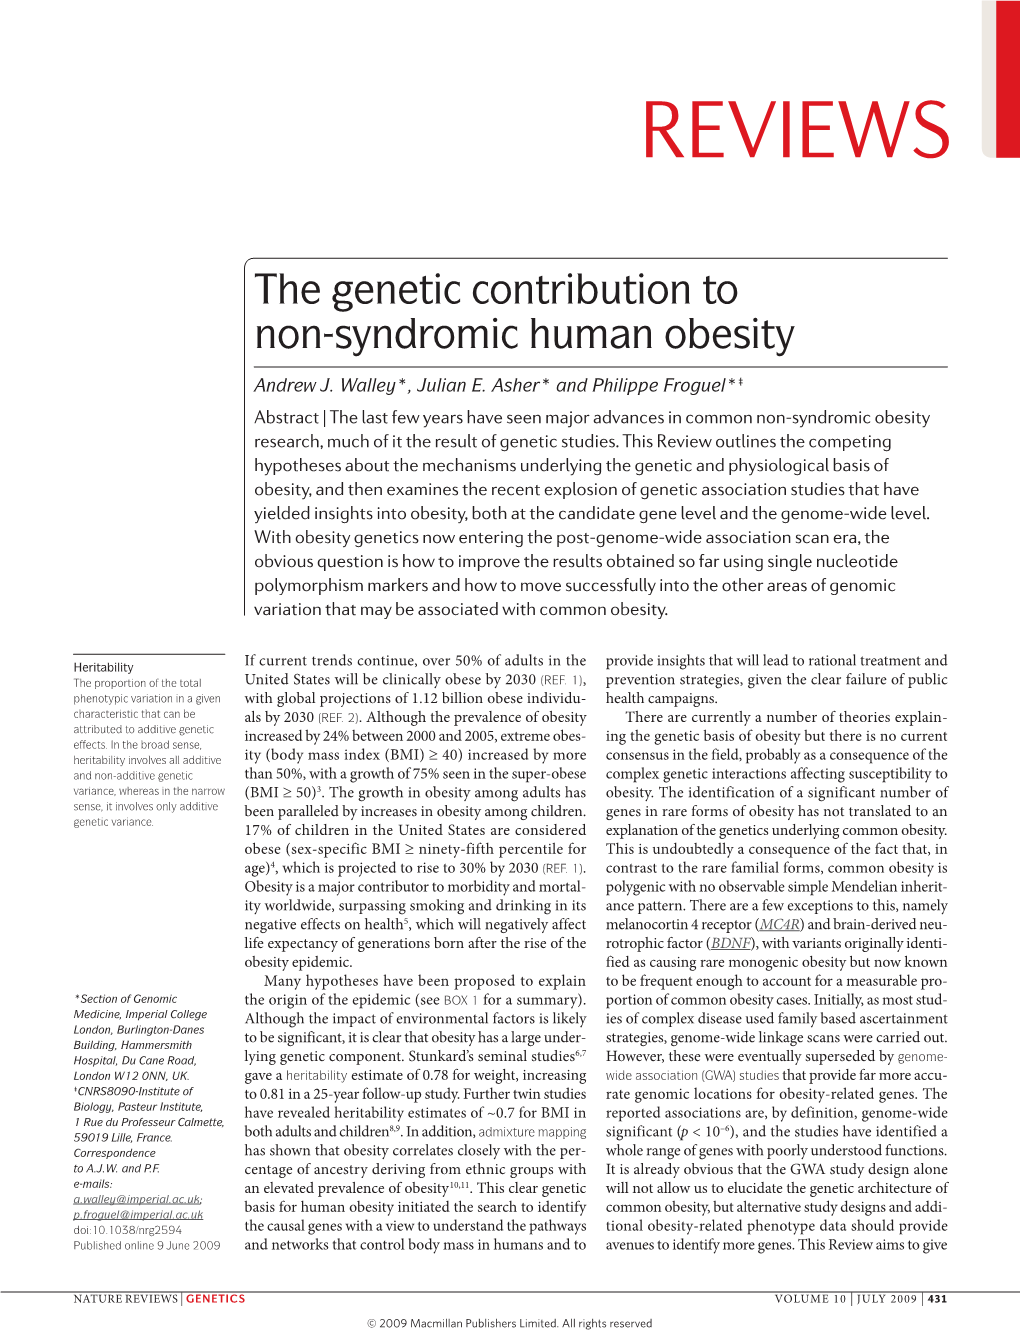 The Genetic Contribution to Non-Syndromic Human Obesity